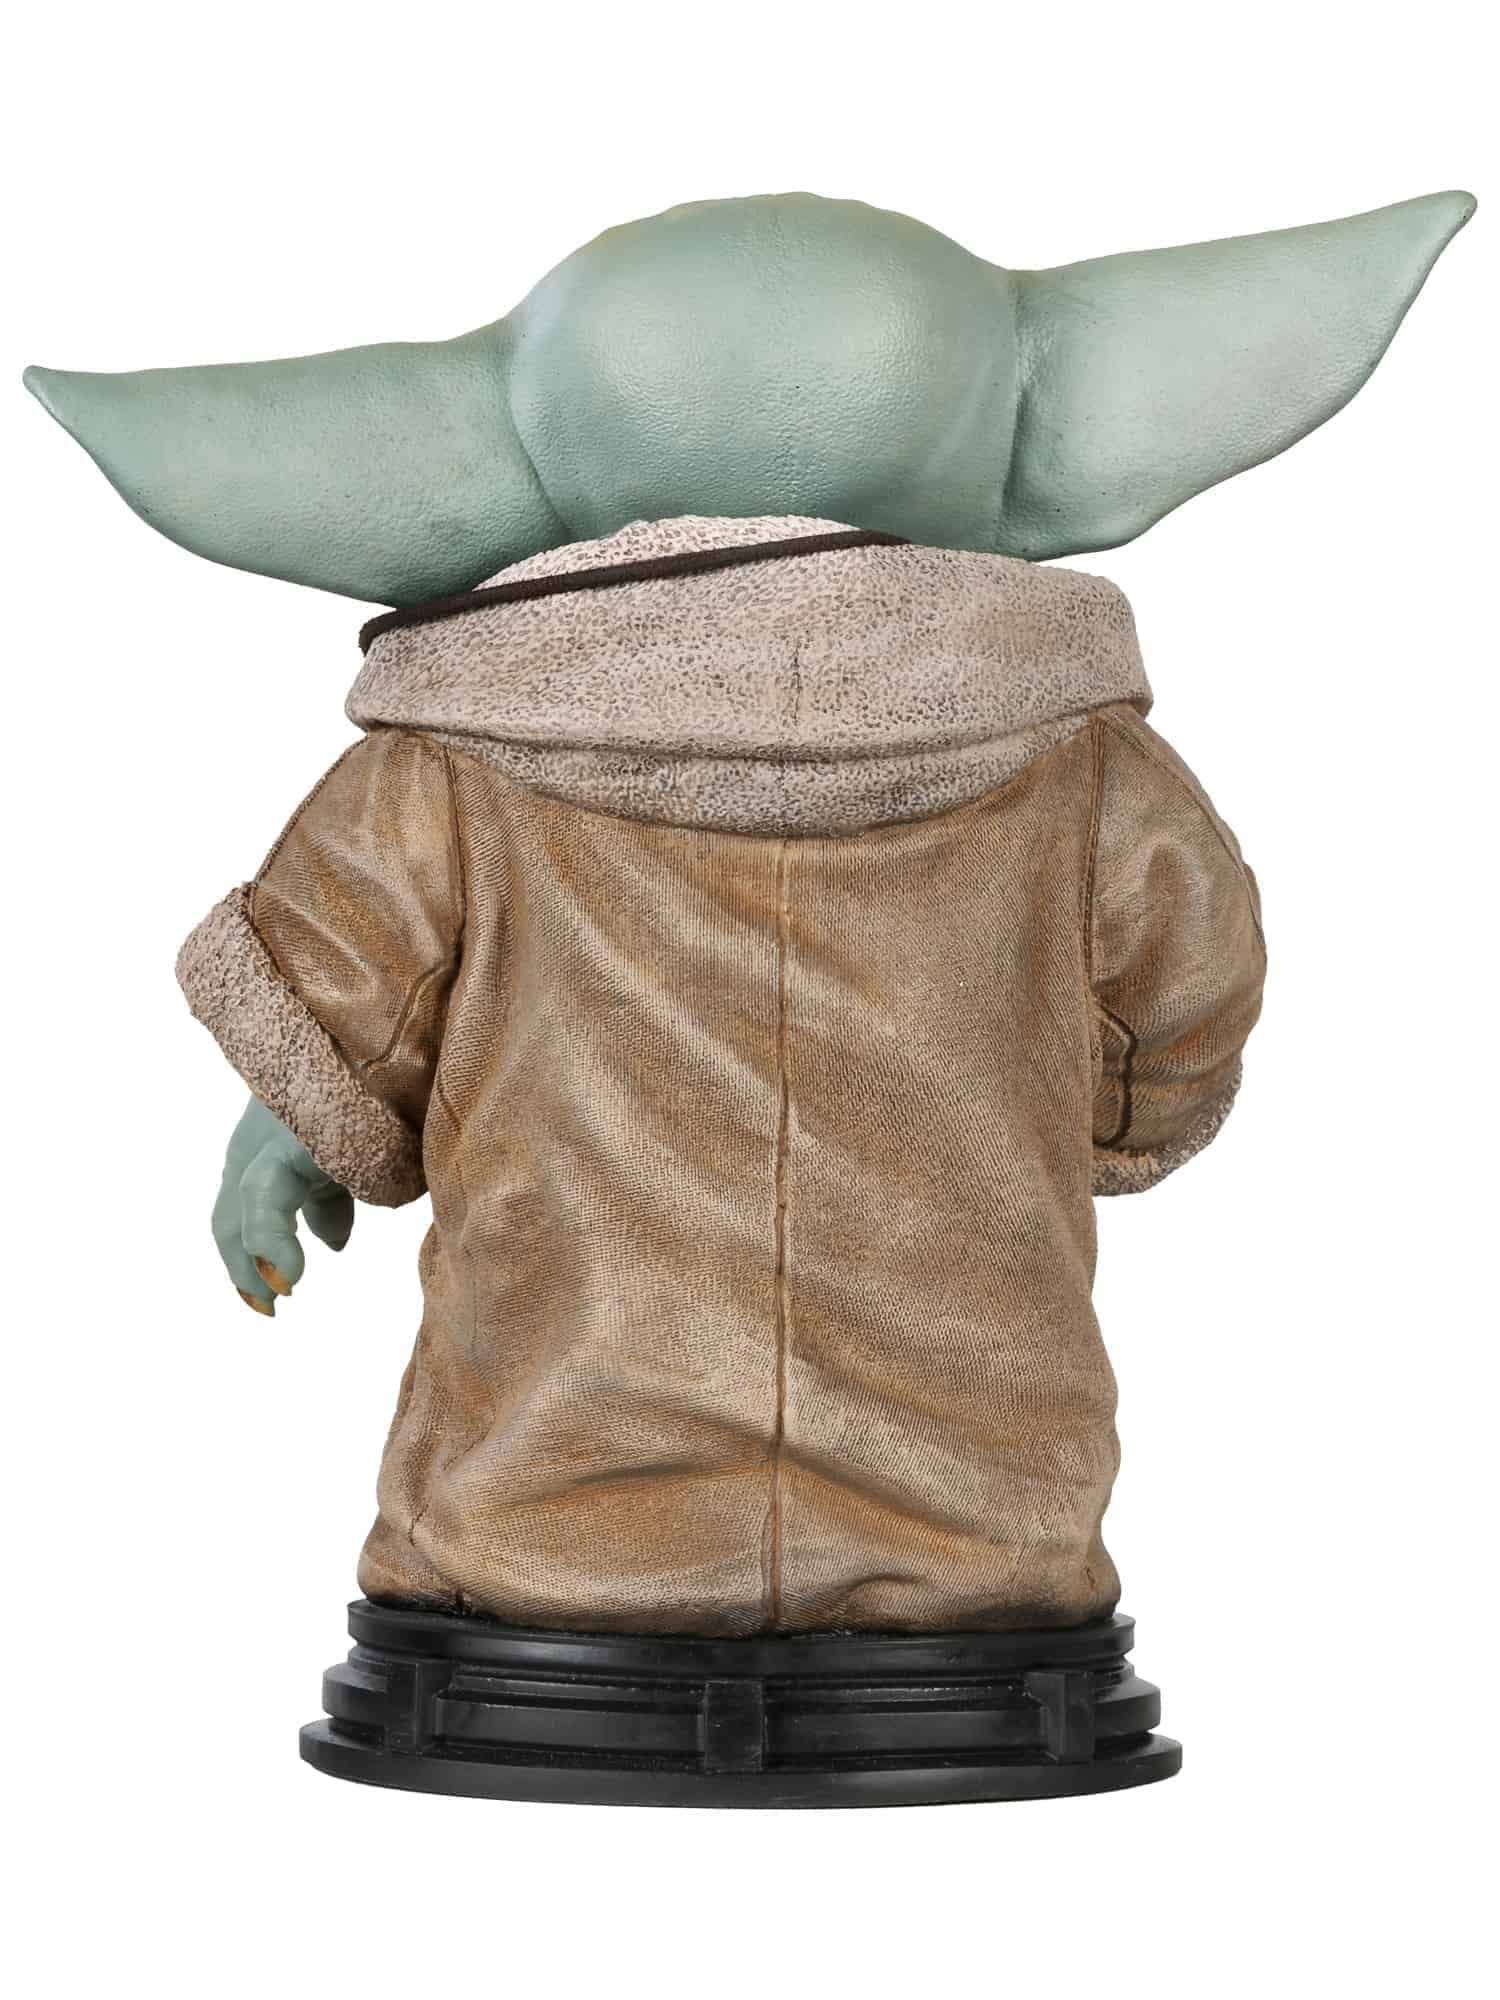 Star Wars and Denuo Novo bring the collectible killer goods 4